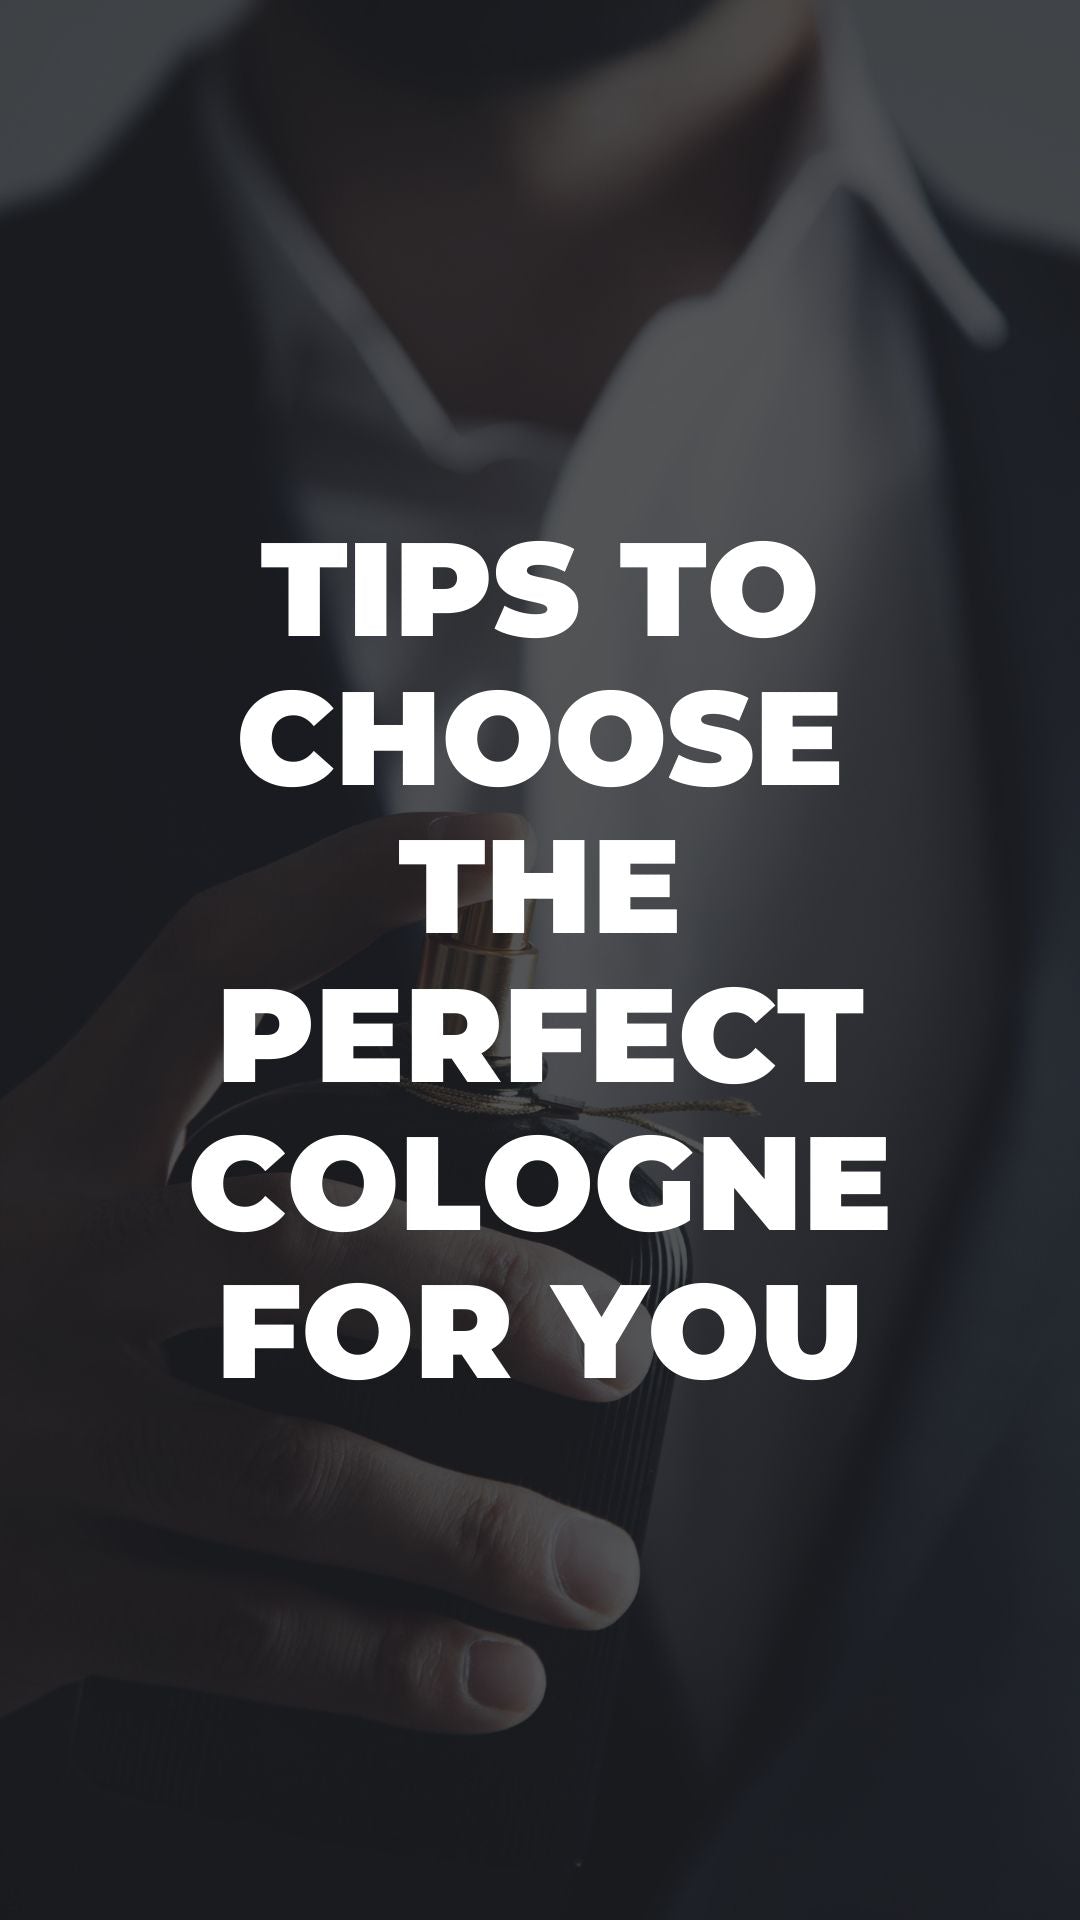 Tips To Choose The Perfect Cologne For You